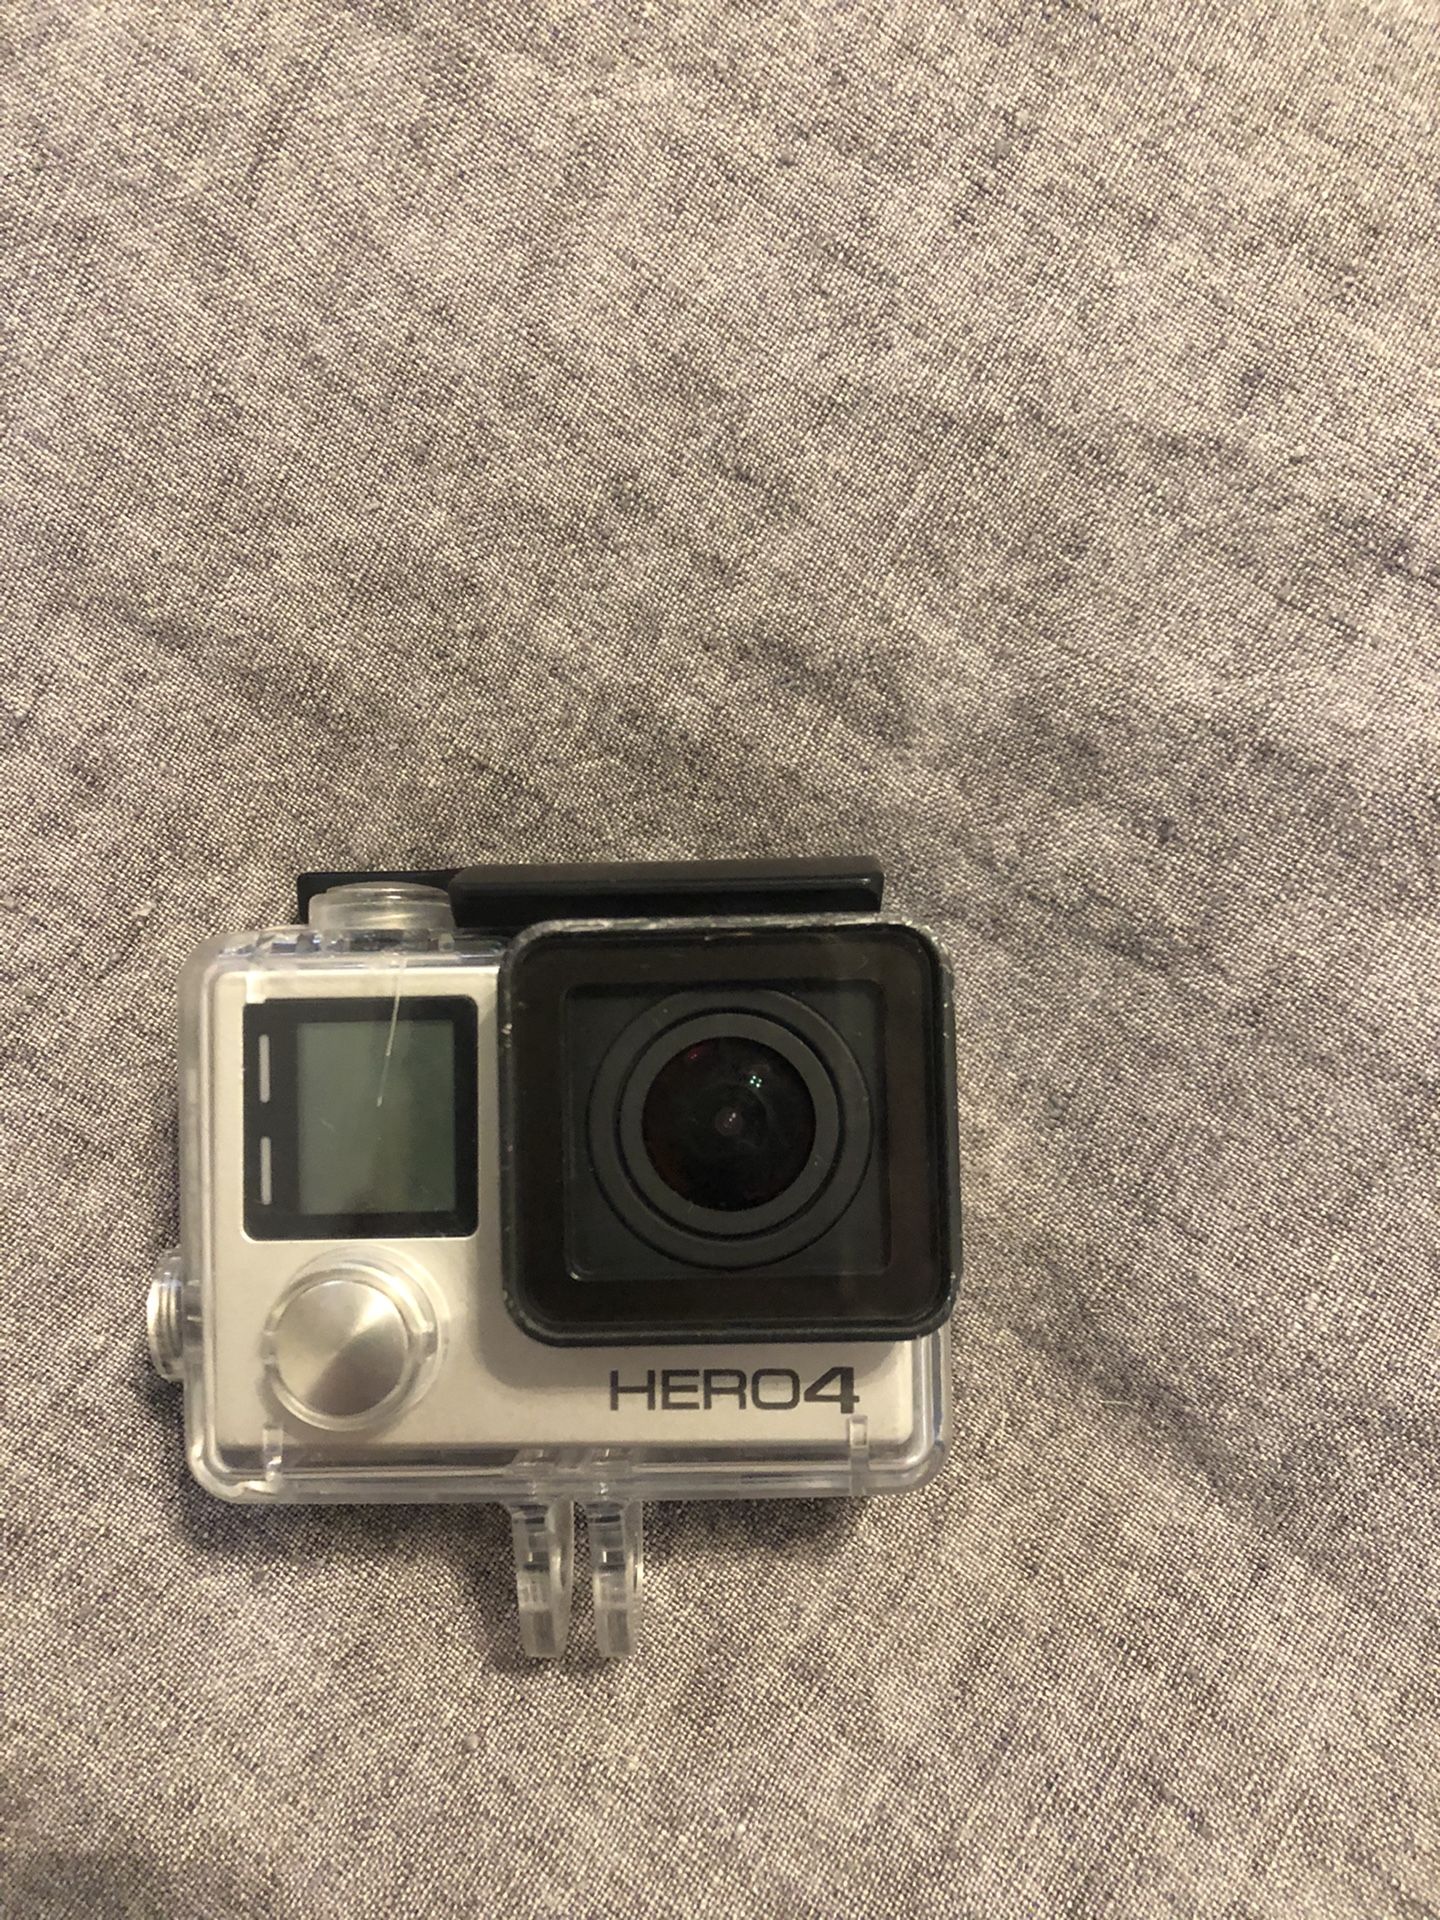 GoPro Hero 4 Black with Batteries, Case, and Accessories (No SD Card)